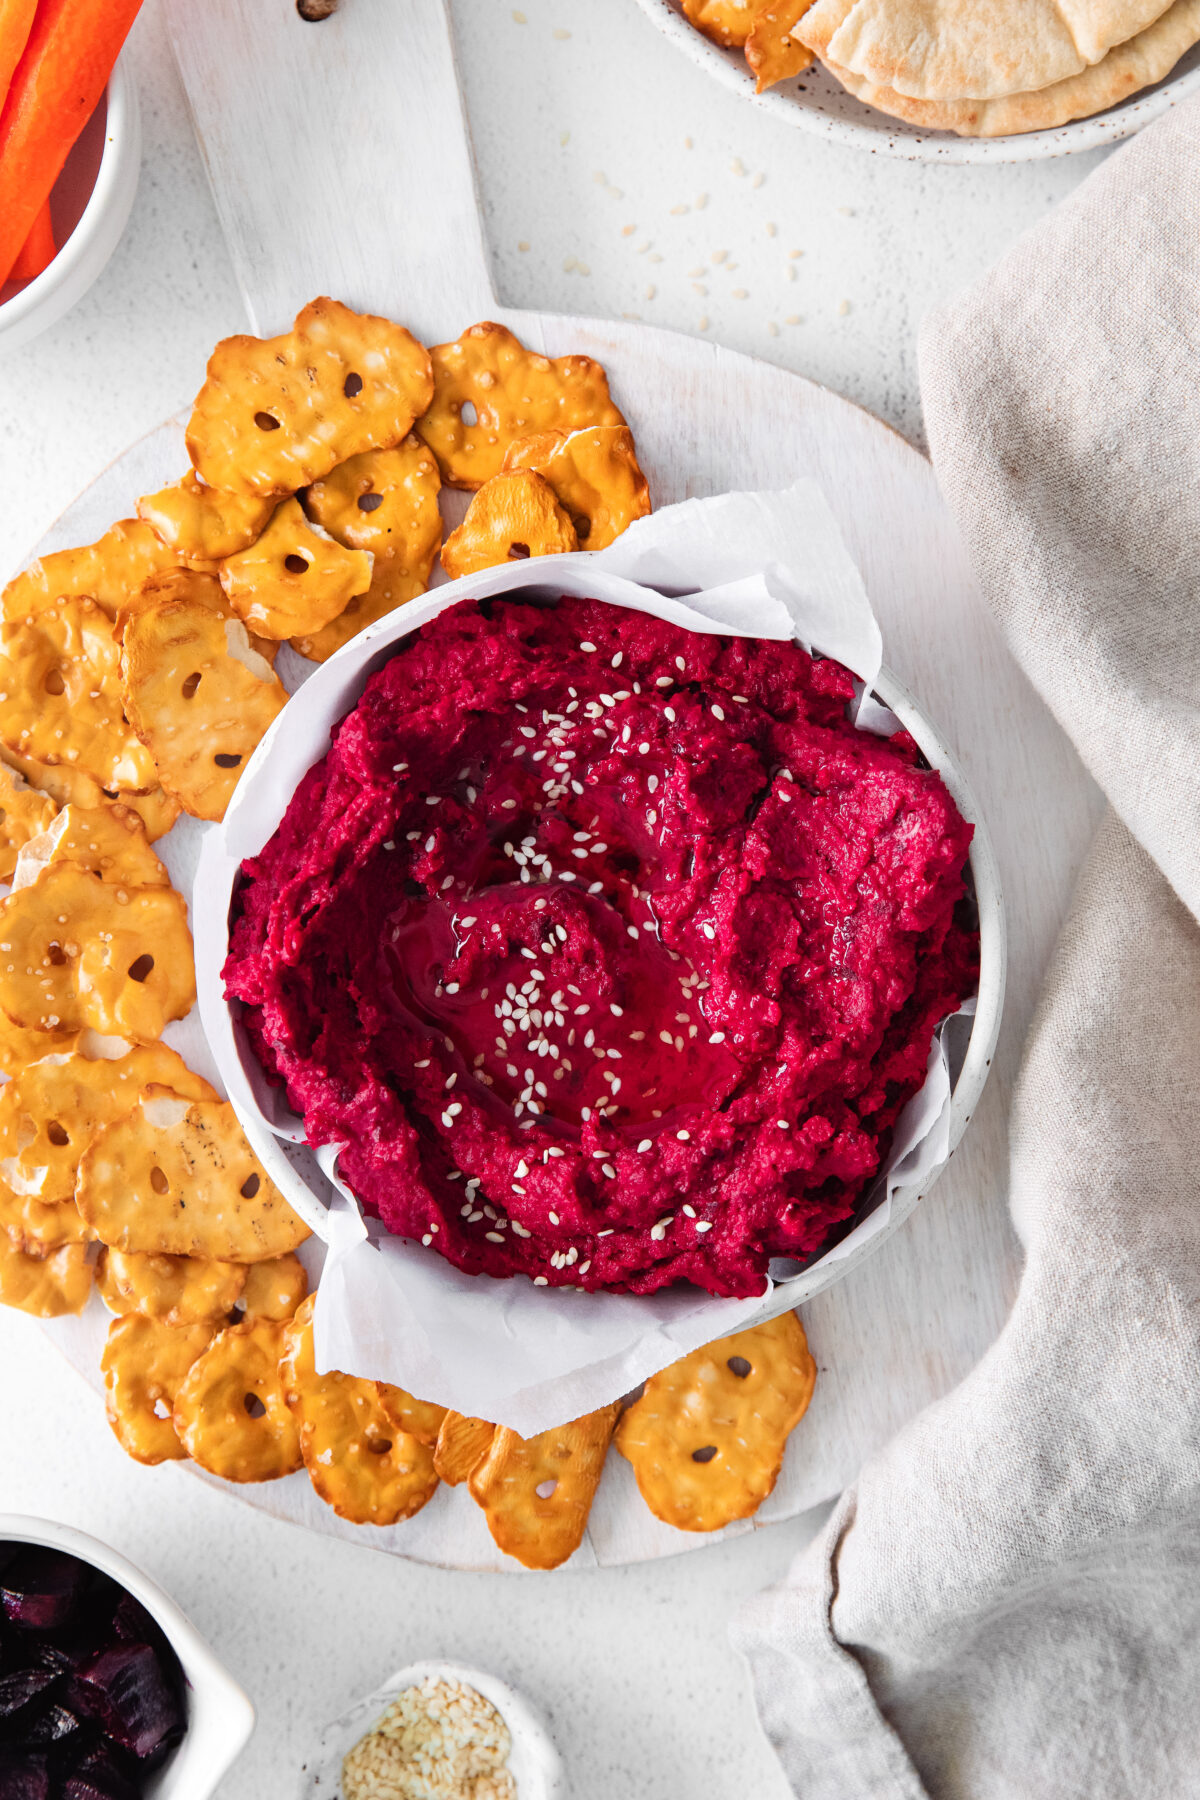 Add a twist to your hummus with this roasted beet hummus recipe! A vegetable-based dip that's dairy-free, gluten-free and vegan.